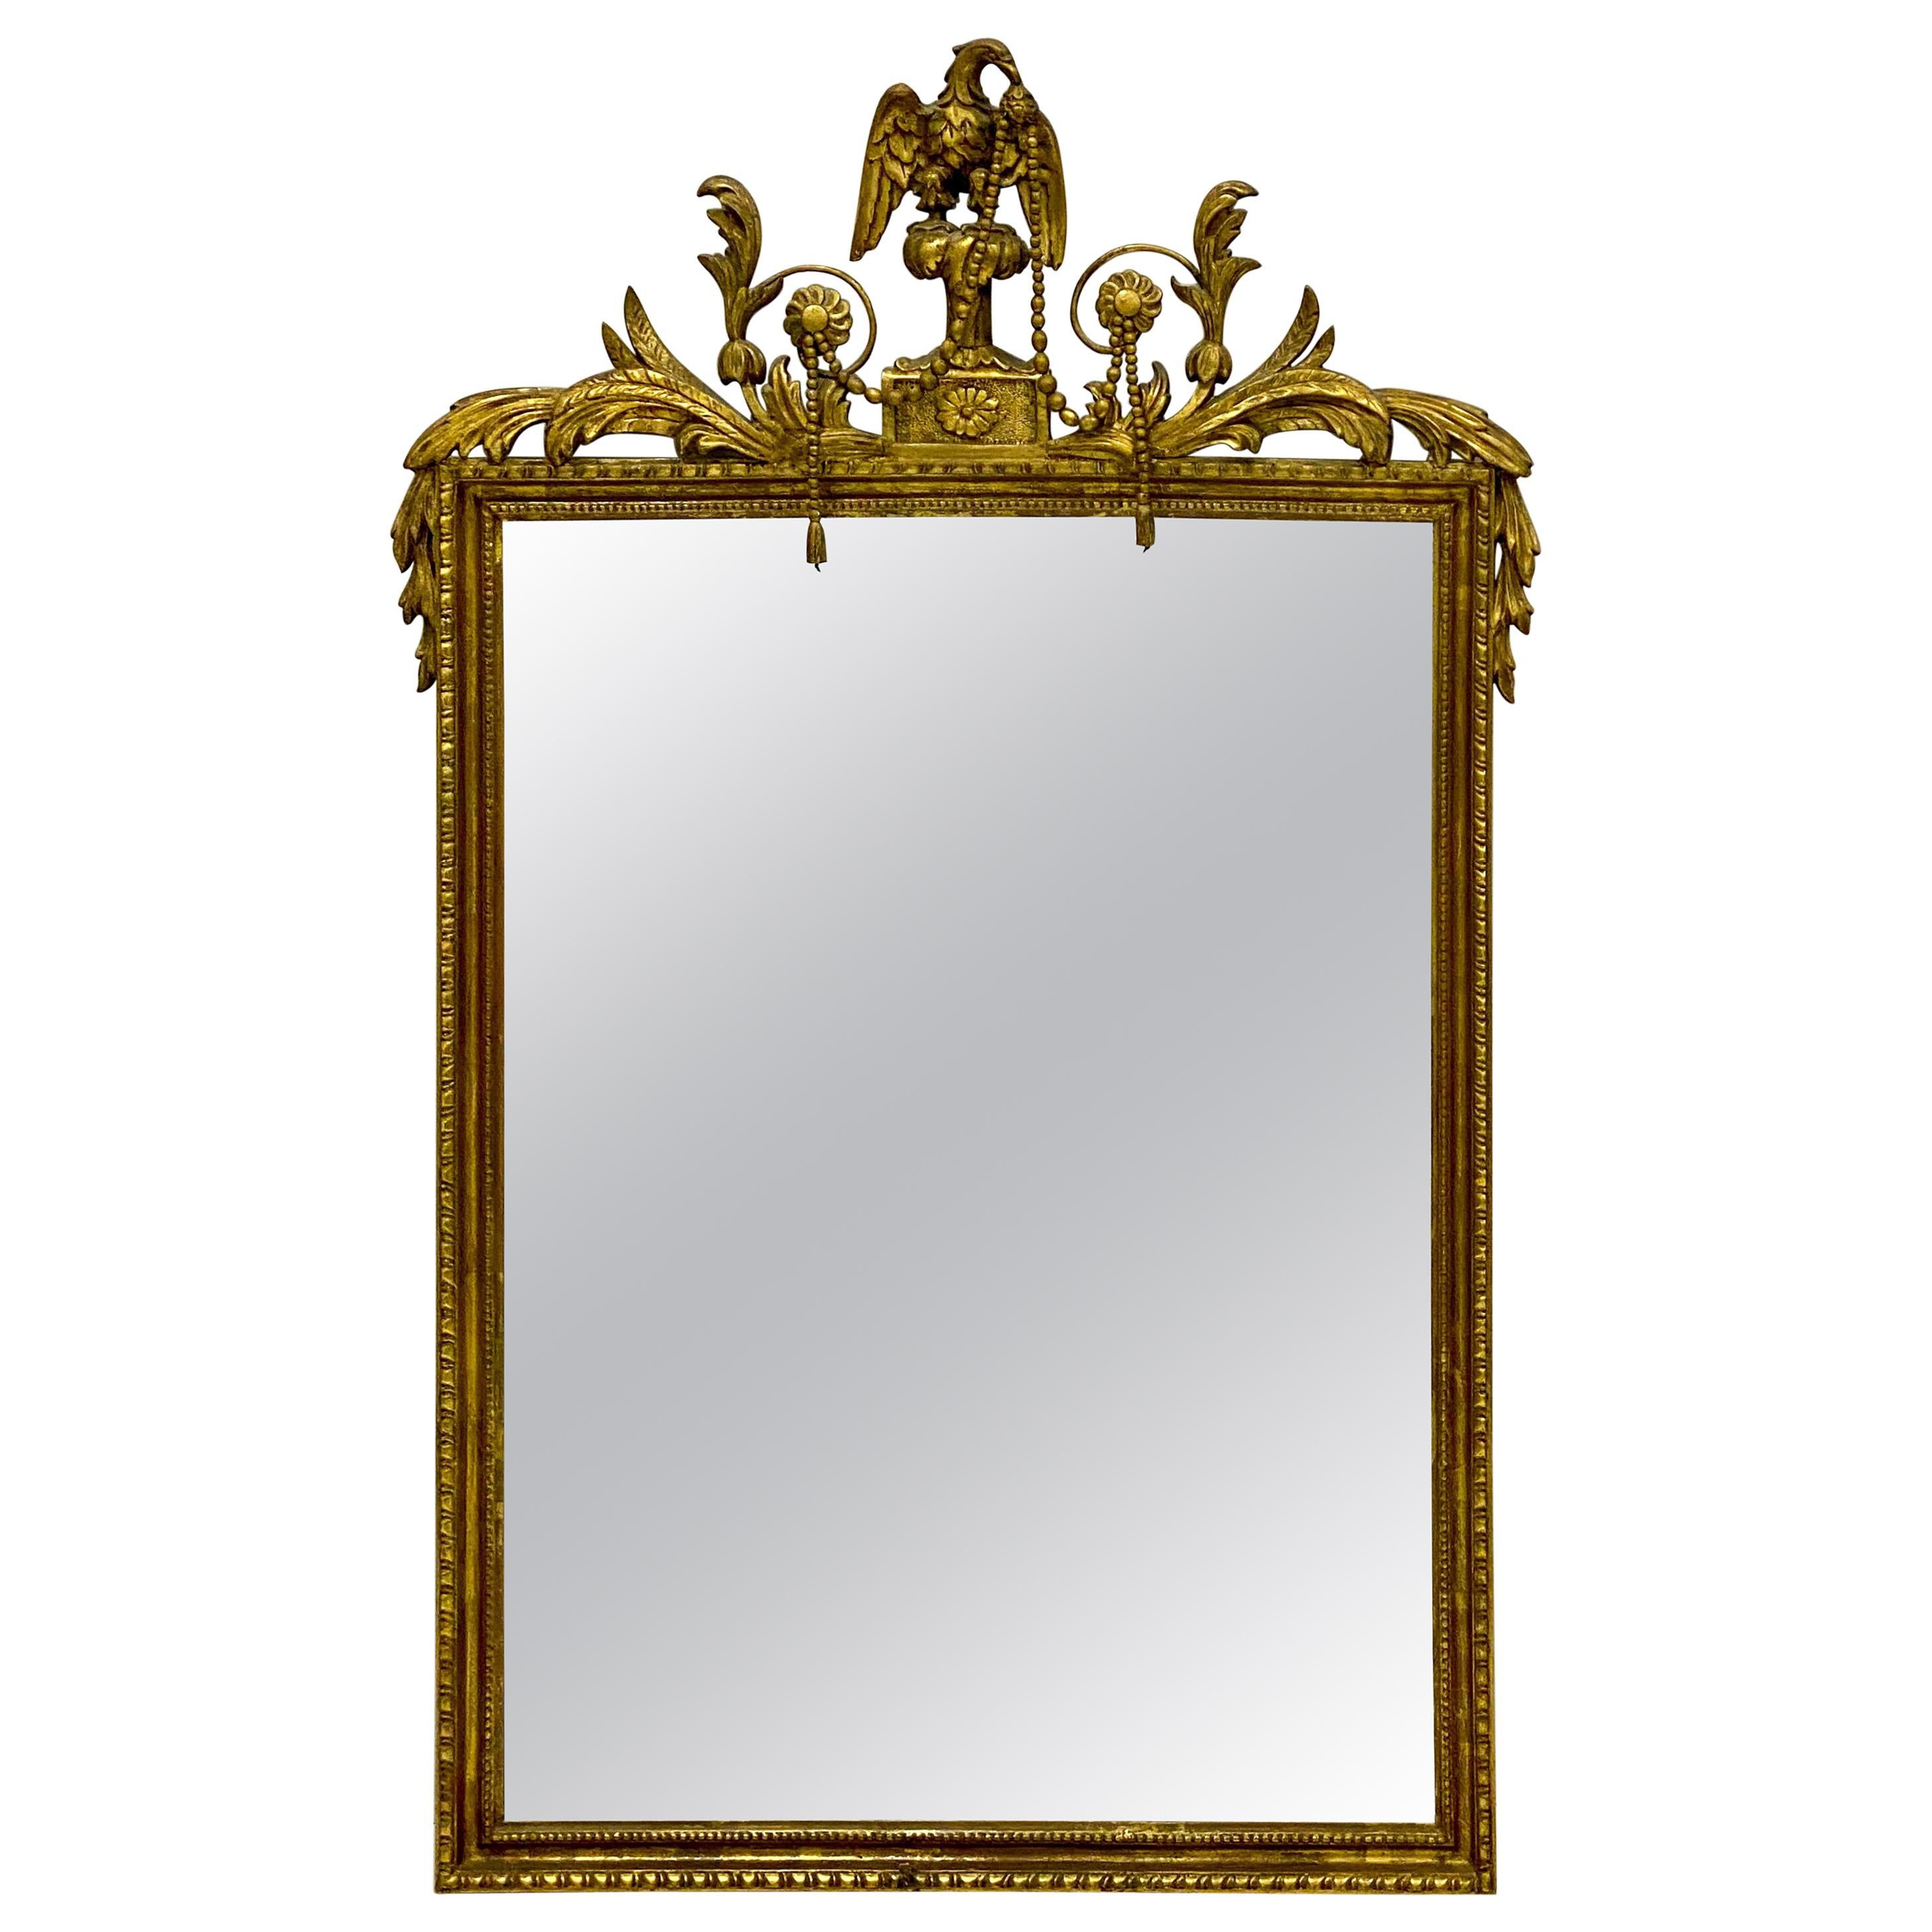 1940s Italian Giltwood Federal Style Mirror with Carved Eagle